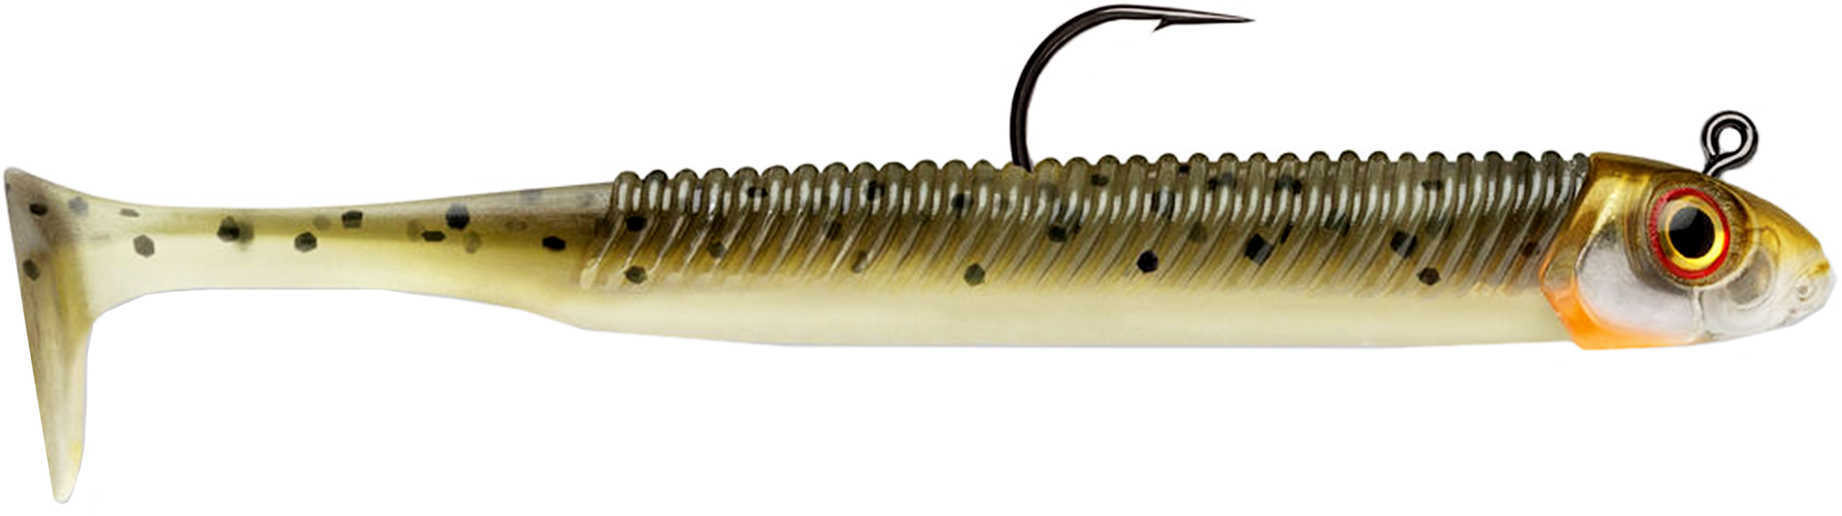 Storm 360GT Searchbait Lure 4.5-Inches 1/4 oz Weight, Smelt, Pack Of 1 Md: SBM45SMT-14J